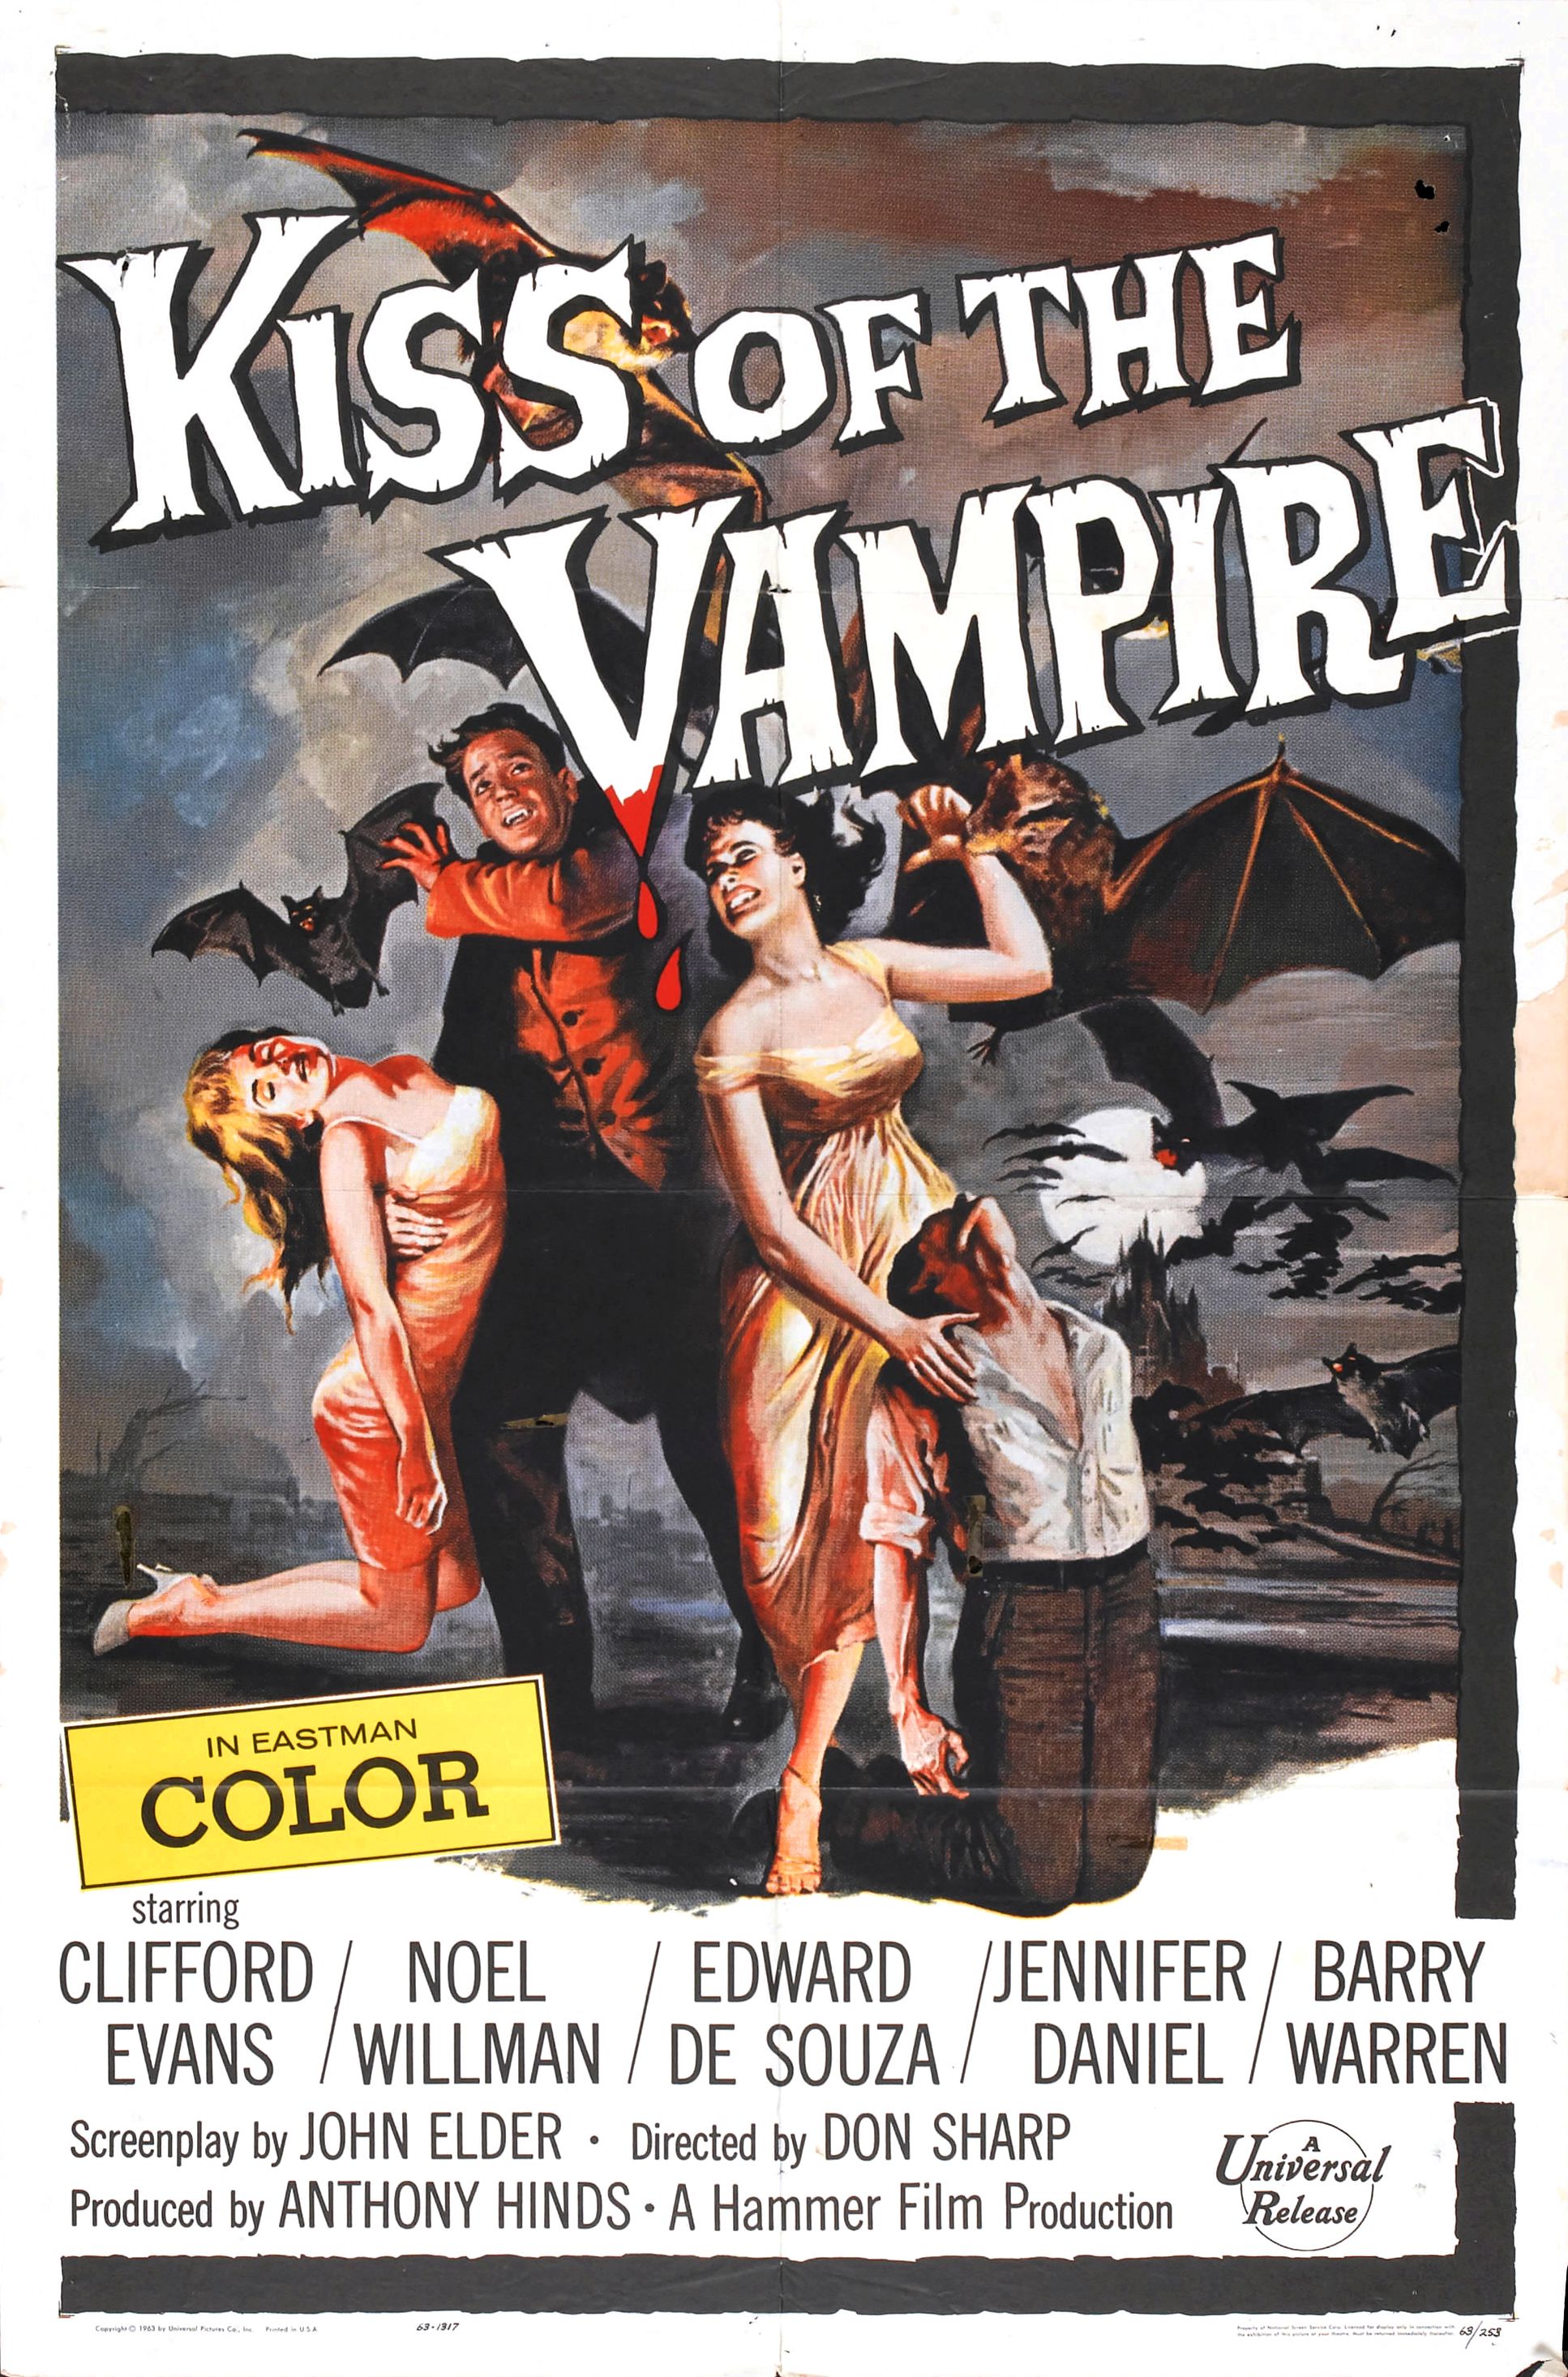 The Kiss of the Vampire [1963]